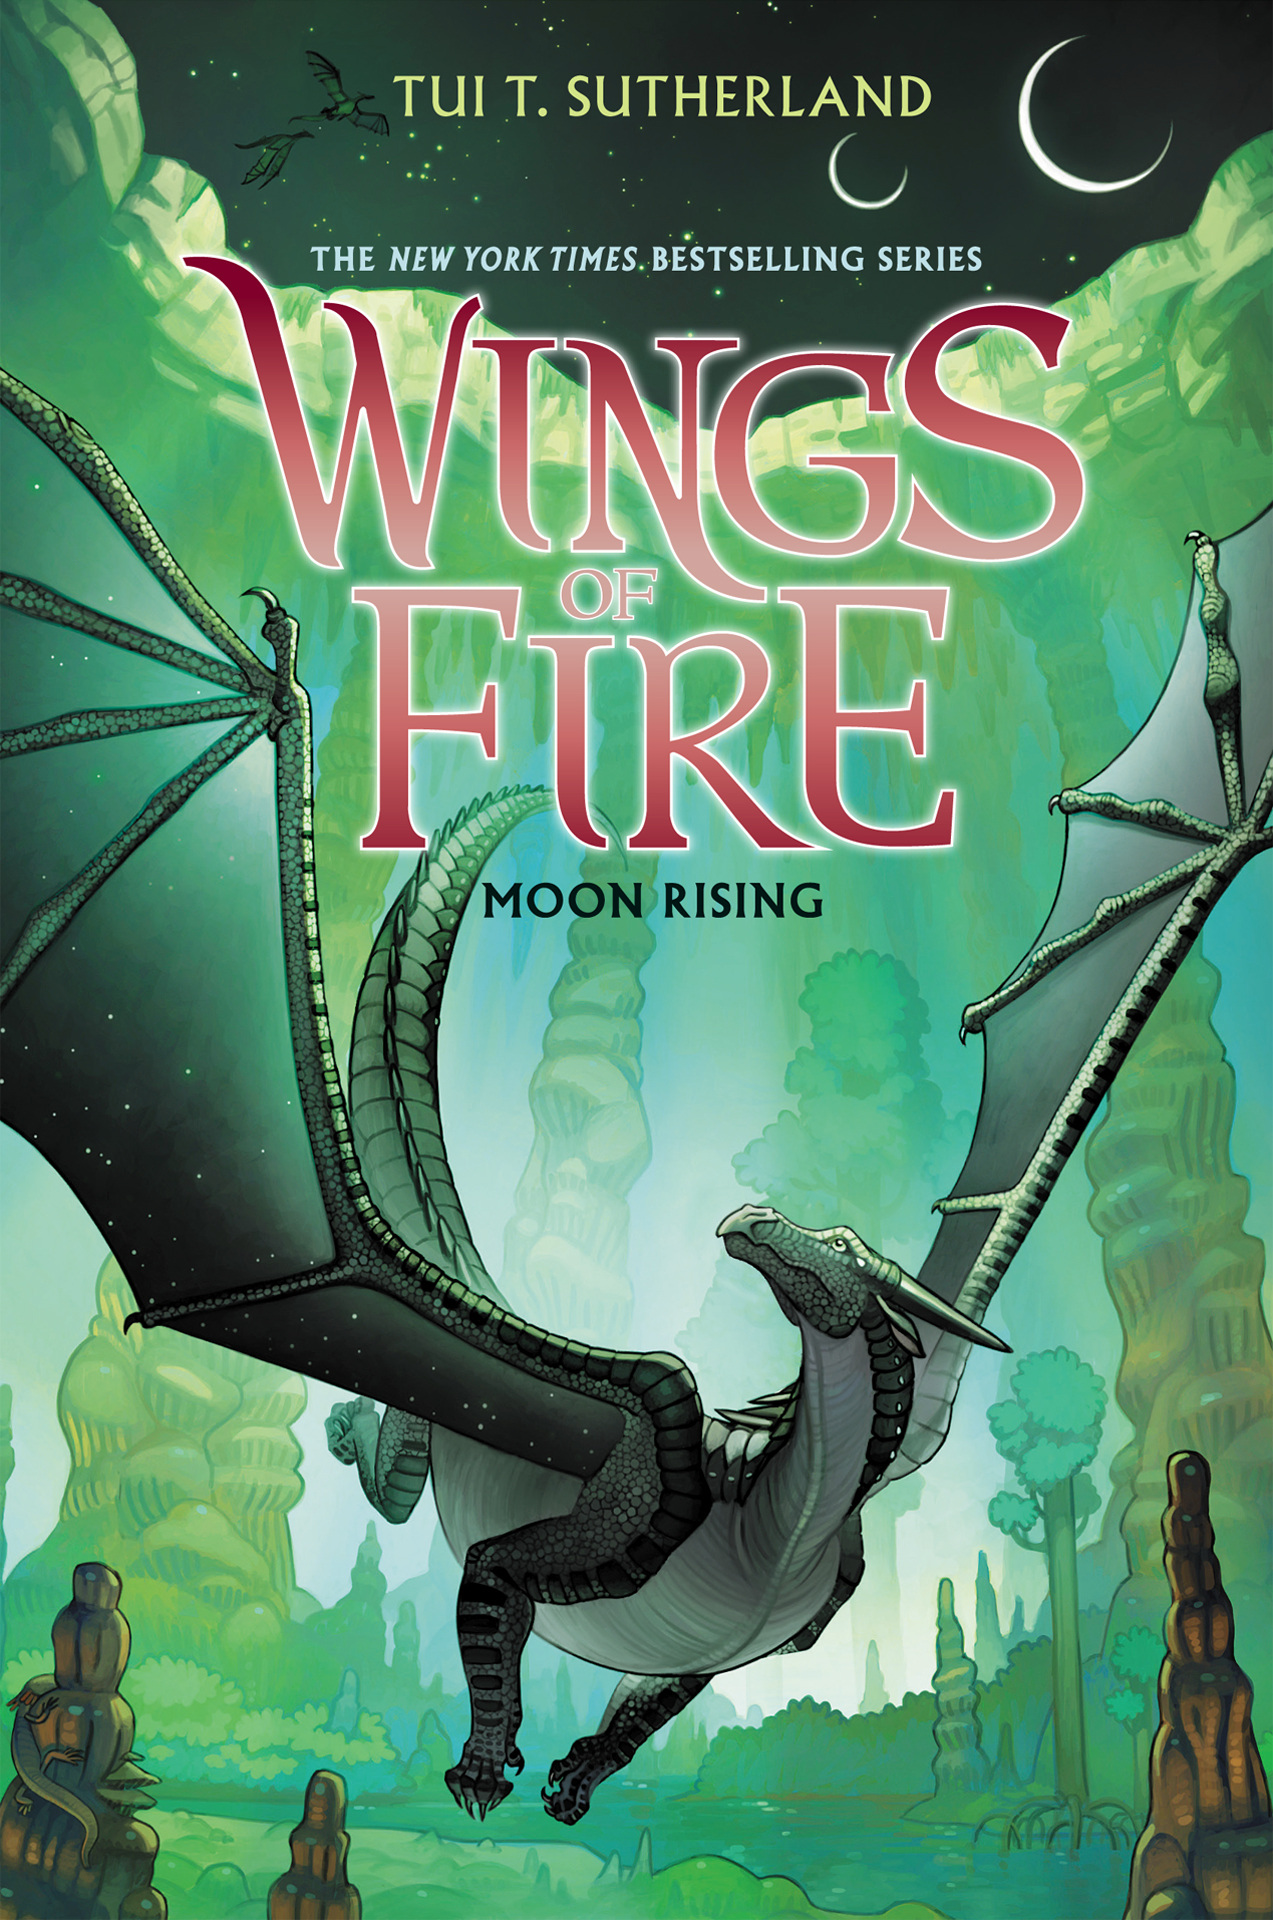 book review of wings of fire in english